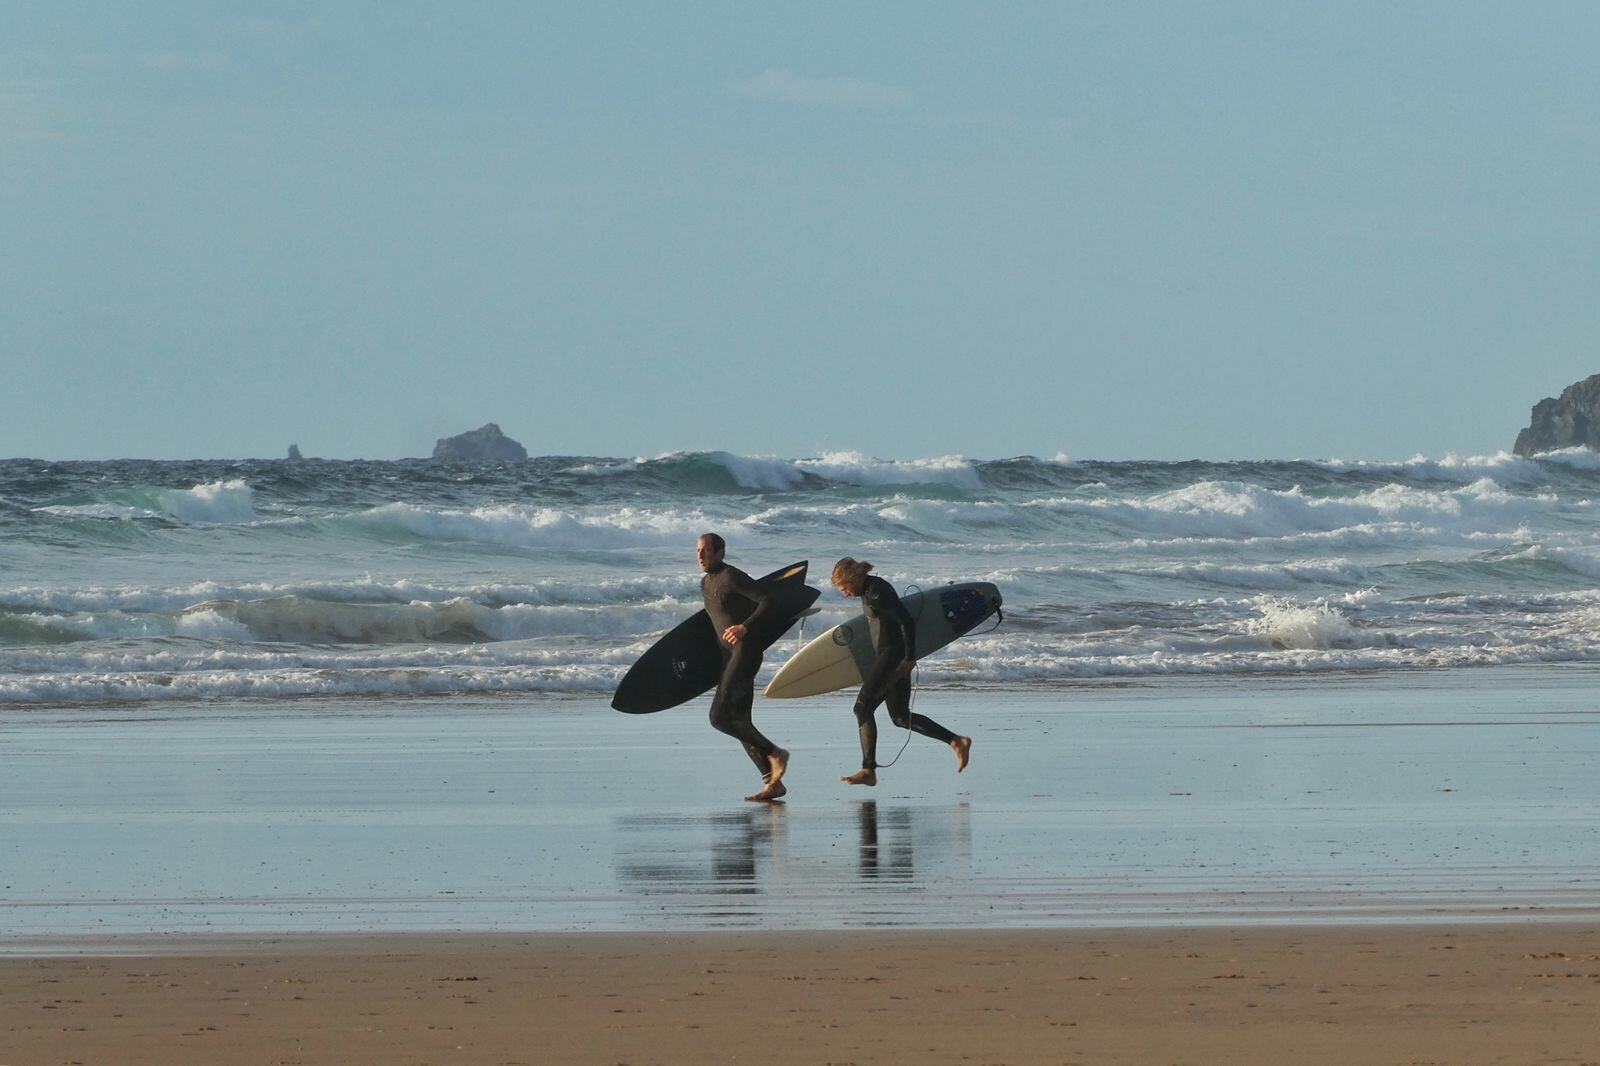 Surfers in Newquay - Photo by Belinda Fewings on Unsplash